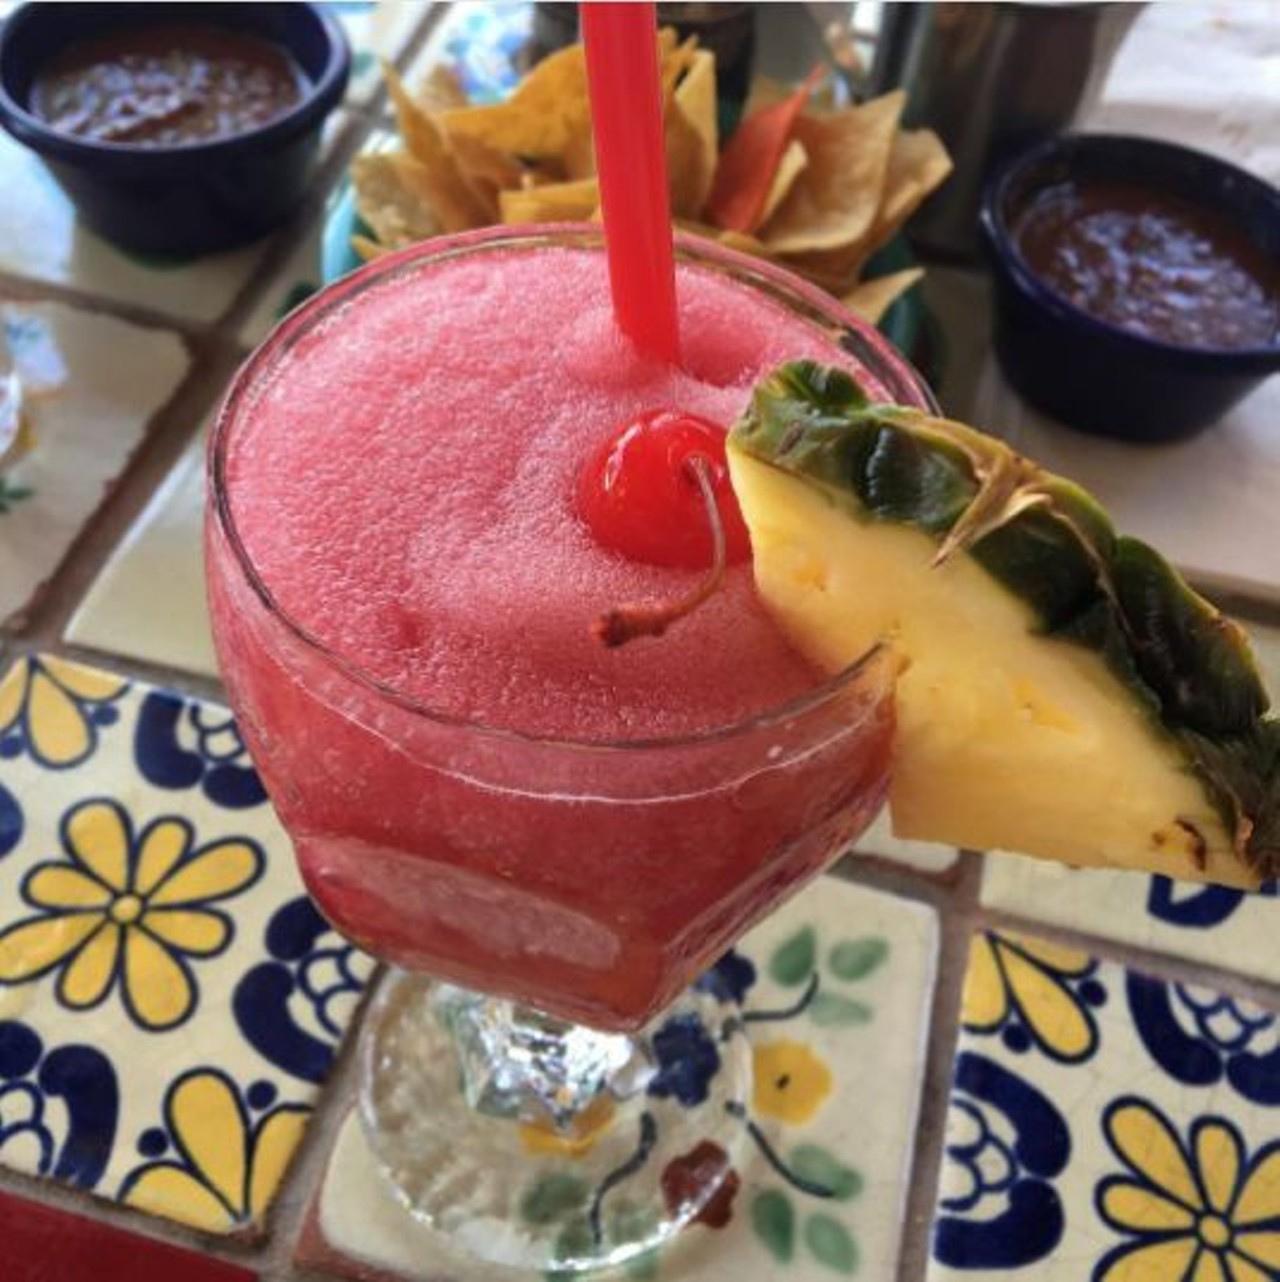 La Margarita Mexican Restaurant and Oyster Bar
120 Produce Row, (210) 227-7140
La Margarita is a crowd pleaser with its extensive margarita menu. Drink, eat oysters and relax on the beautiful patio that overlooks the Market Square plaza.
Photo via Instagram, ms_glad